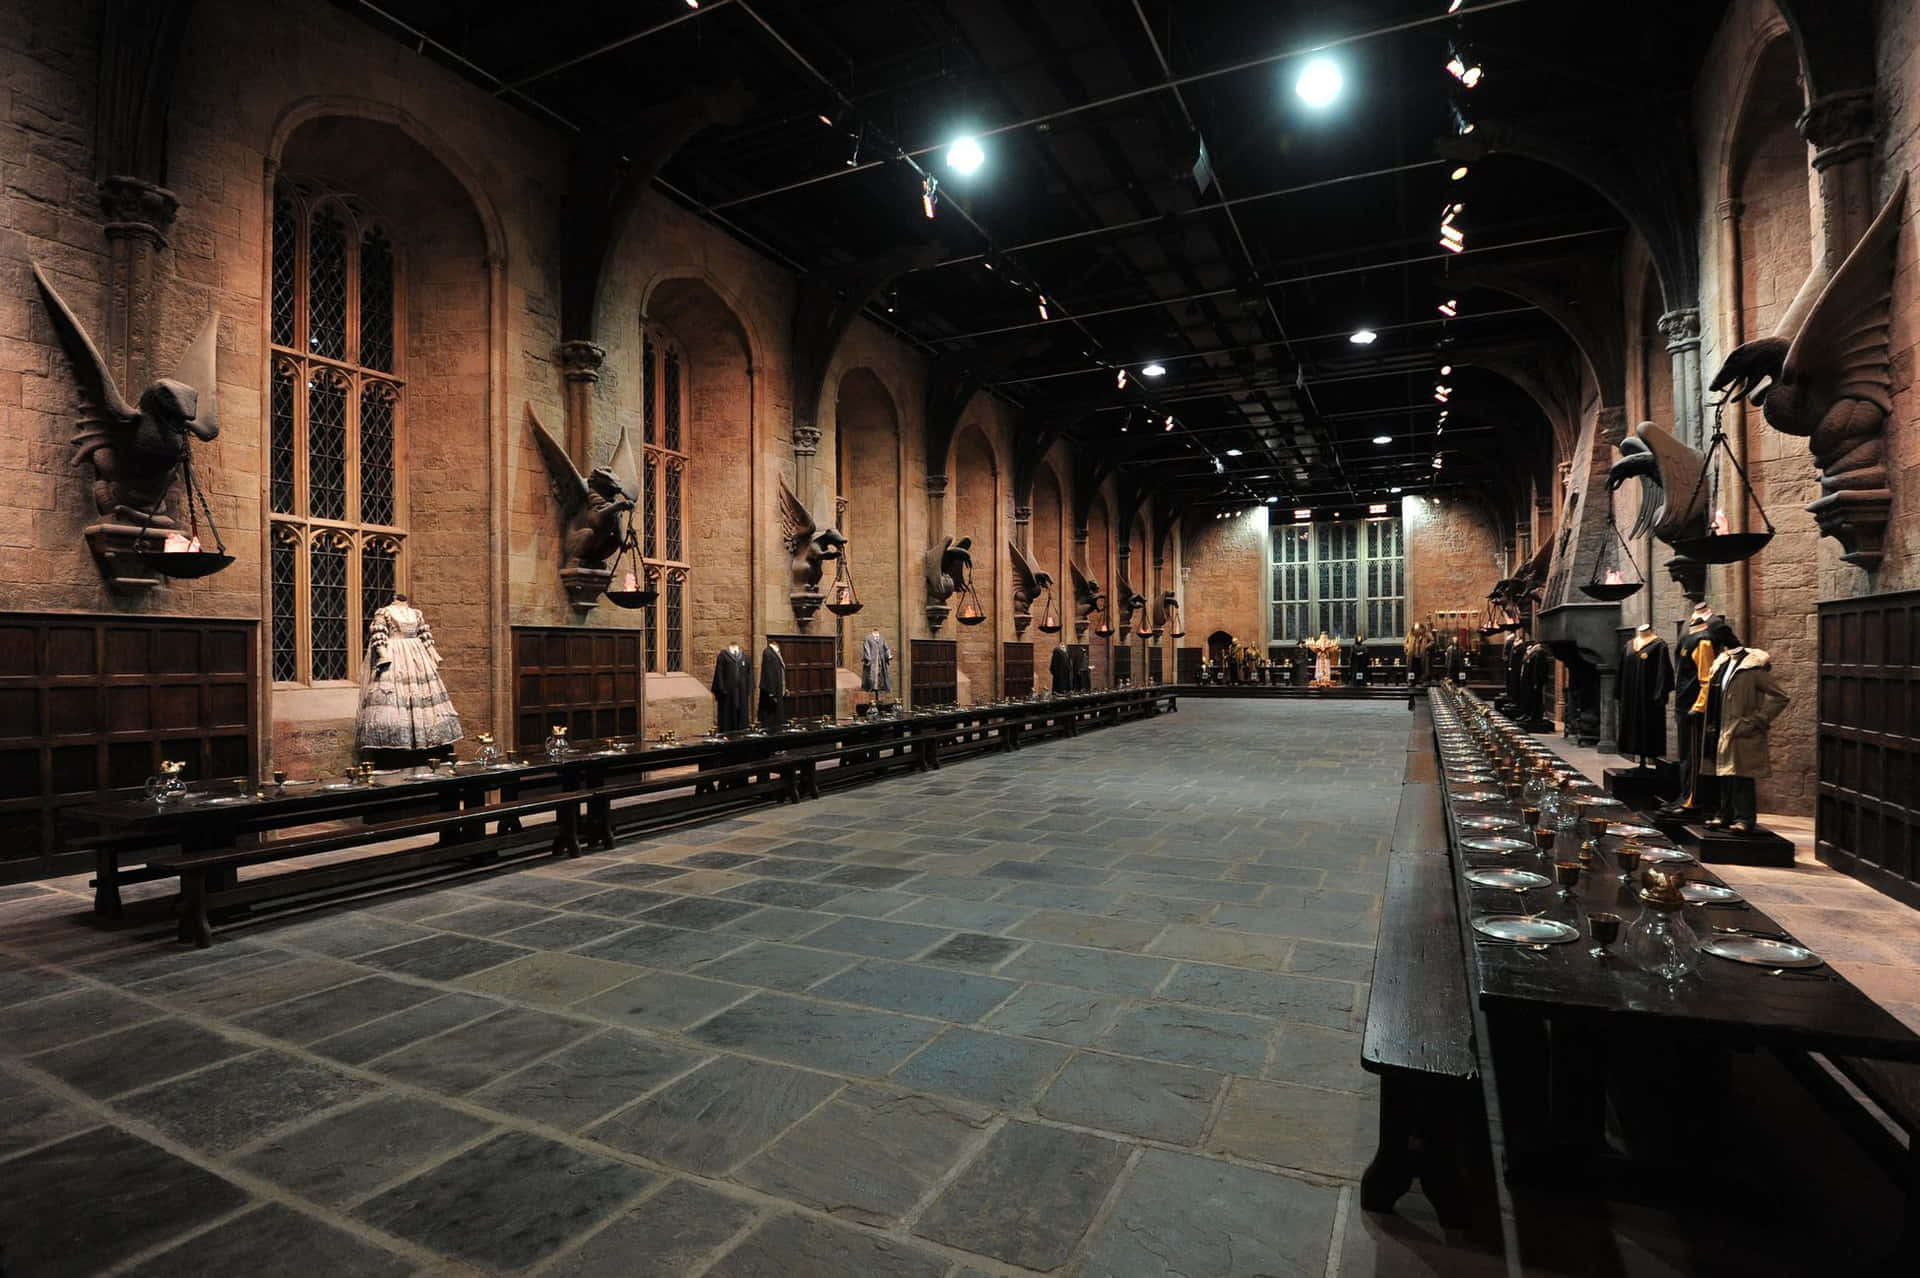 The Hogwarts Great Hall, symbol of the magical world of Harry Potter." Wallpaper